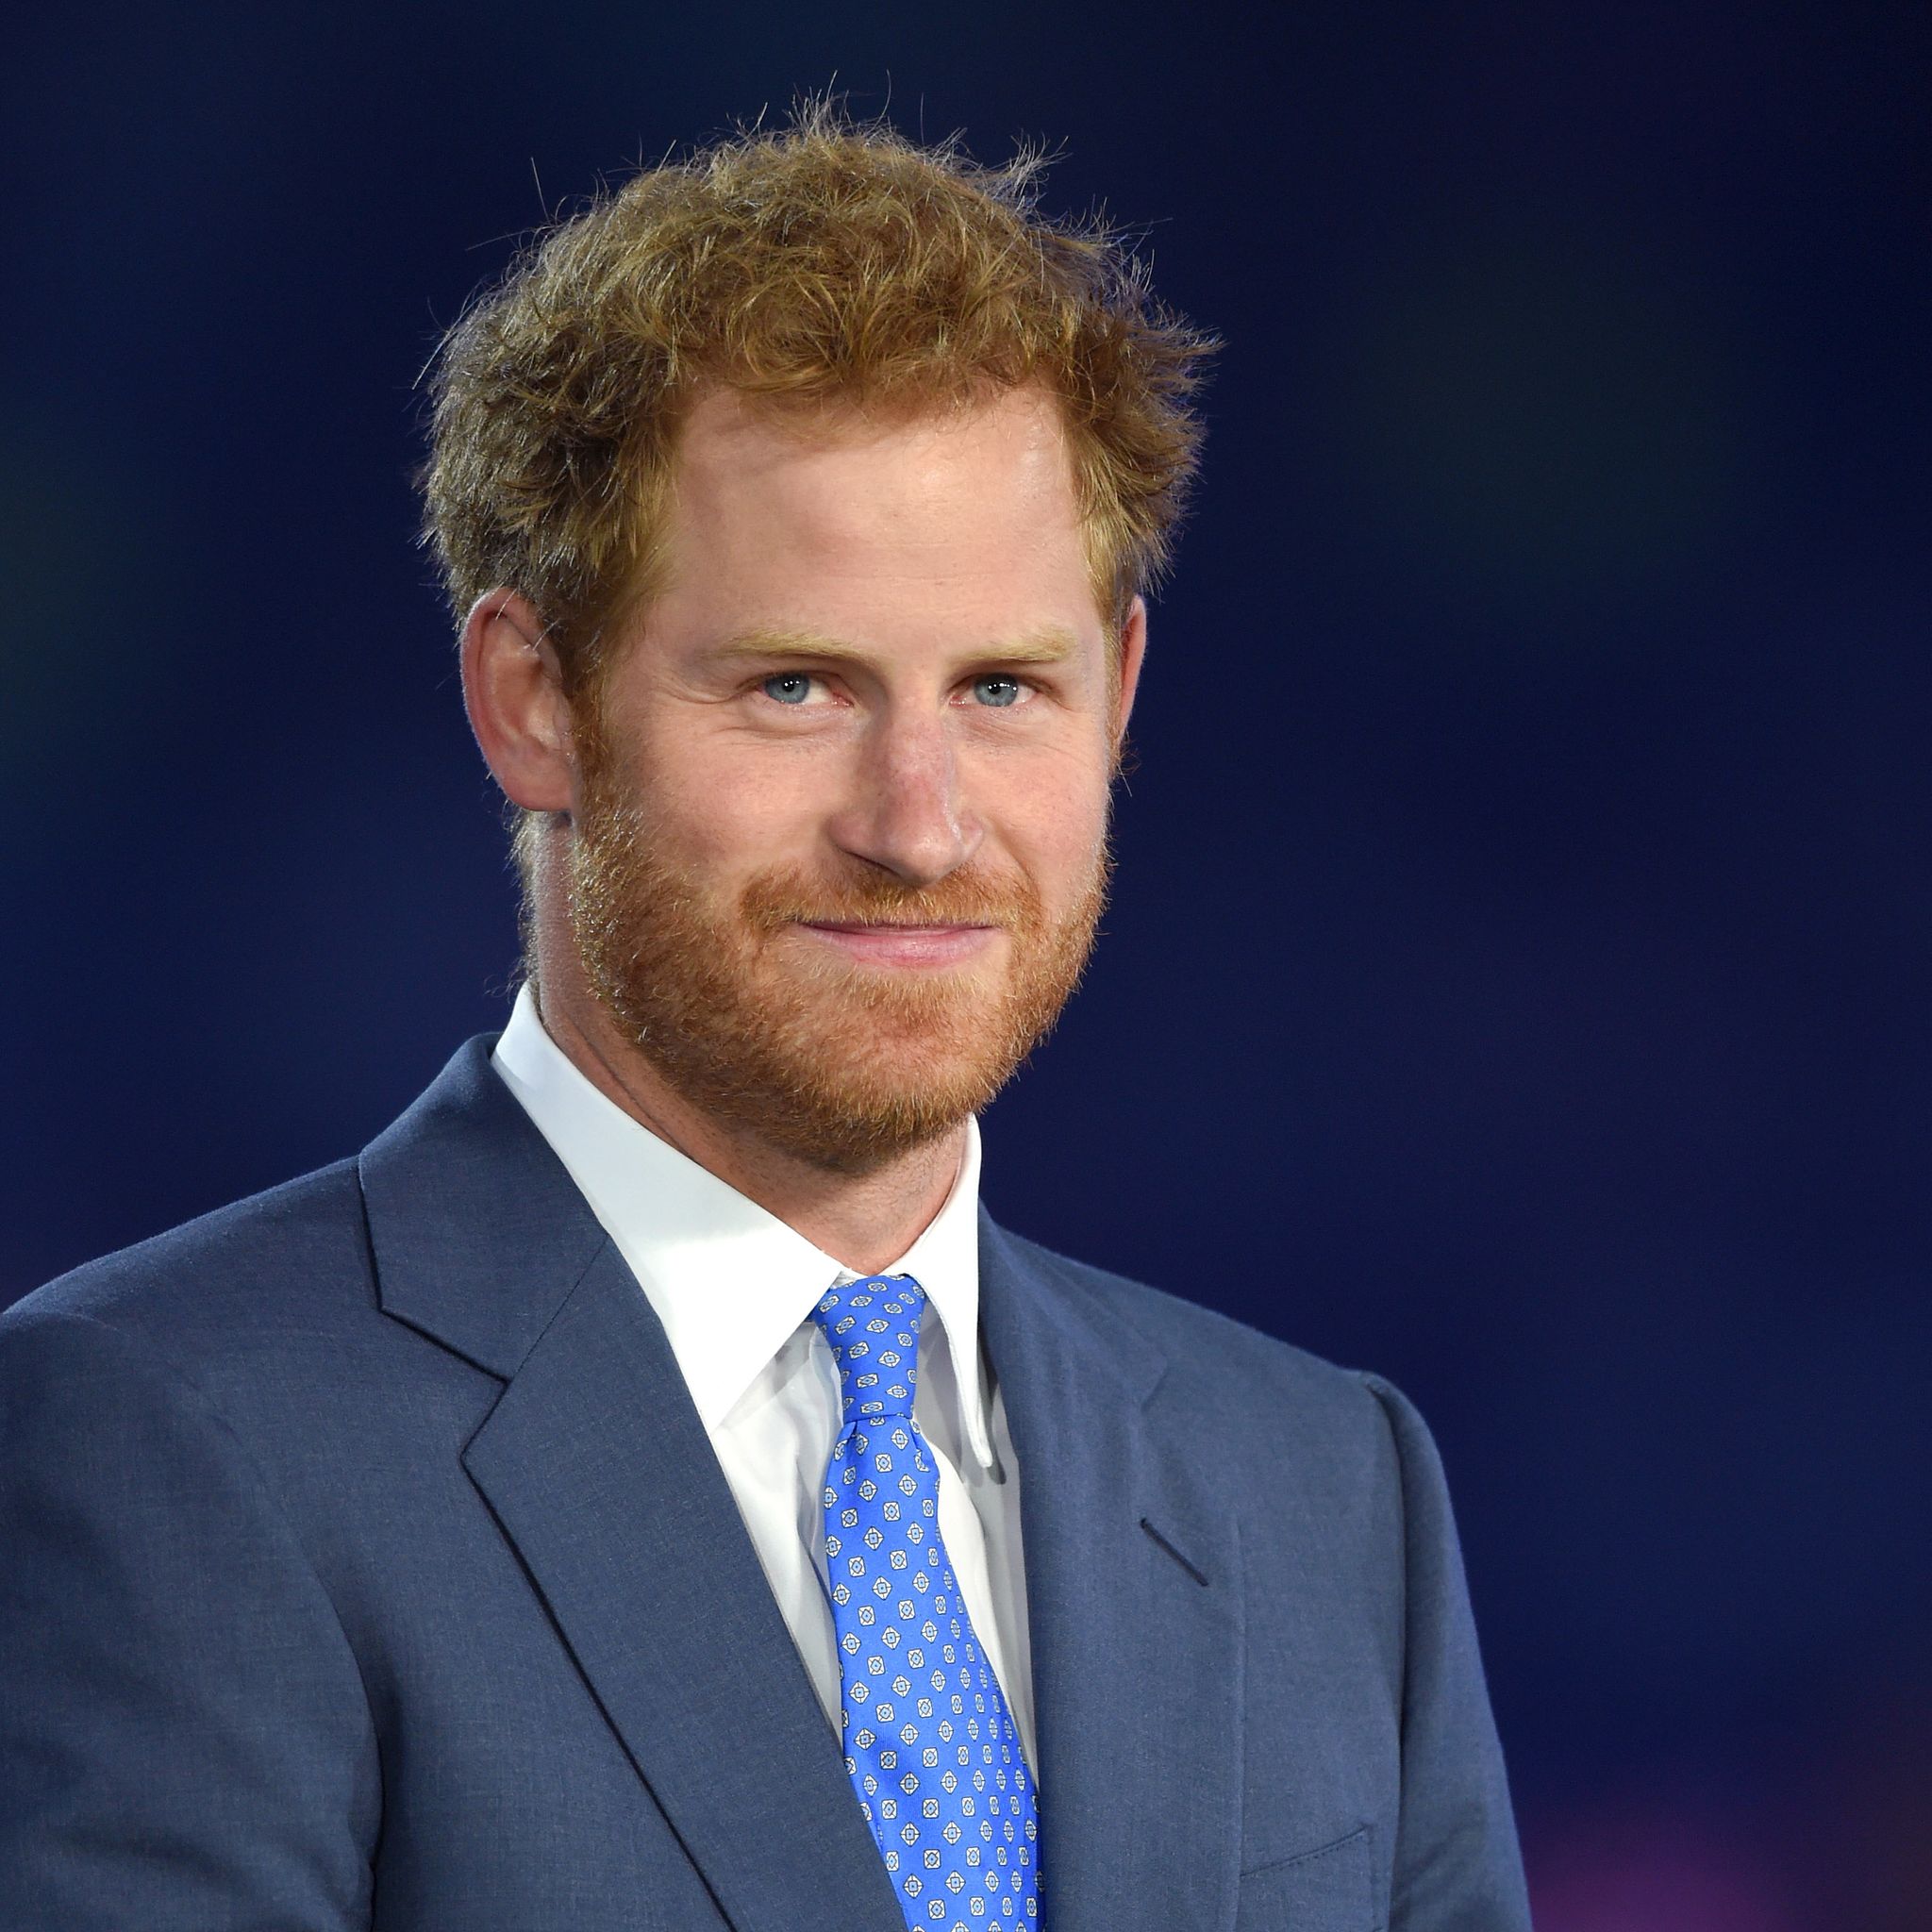 Who Prince Harry was apparently dating when he met Meghan Markle